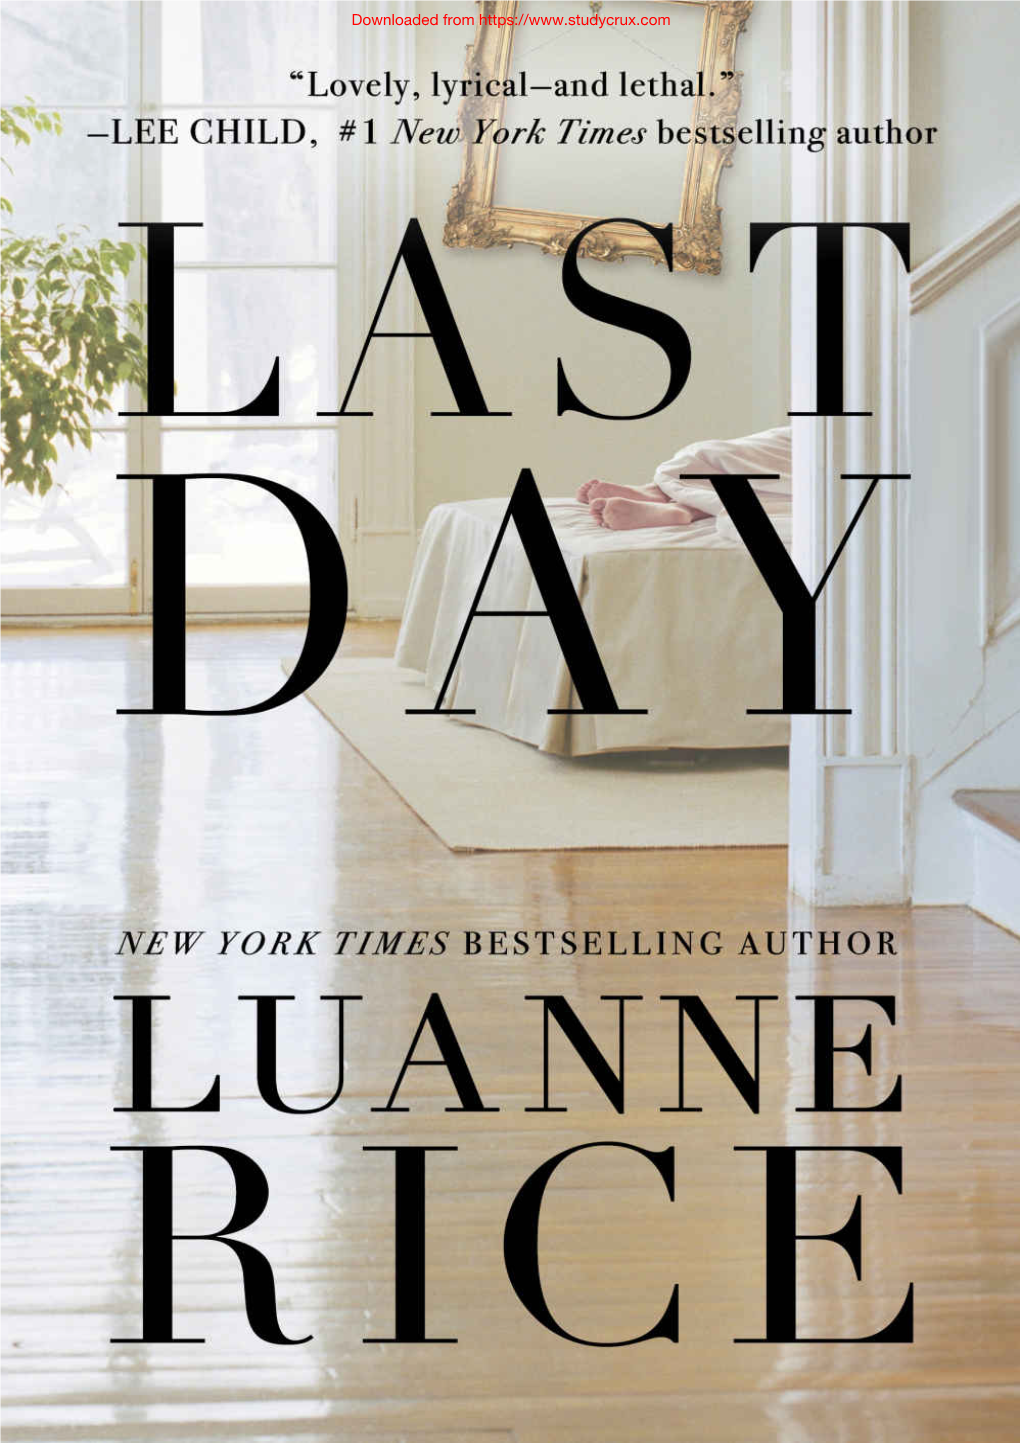 Last Day, Luanne Rice Shows Once Again Her Unique Gift for Portraying the Emotional Landscape of a Family